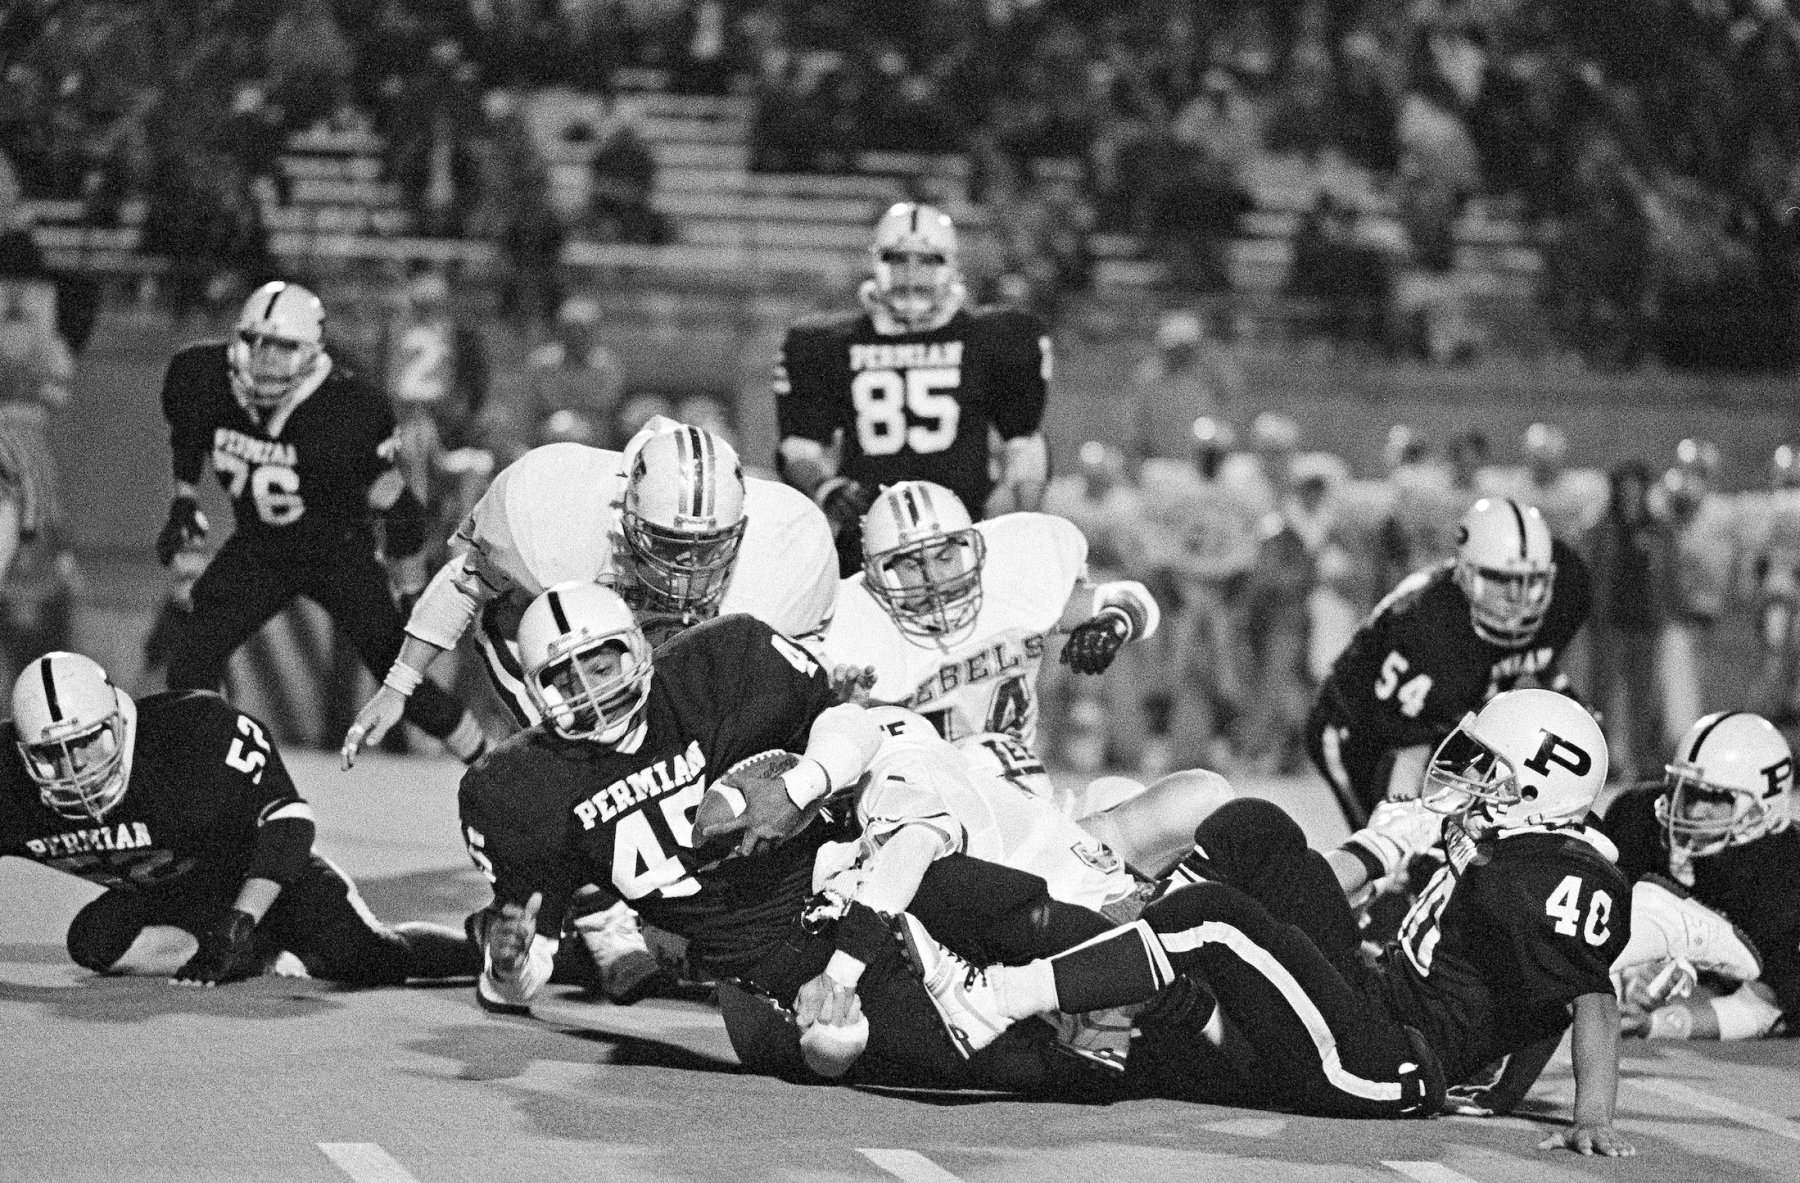 Running back Chris Comer rushes for a first down against the arch-rival Midland Lee Rebels.<br><br>“Comer really became quite the star for them that year,” Clark says. “The next season, he did an amazing job and Permian were state champions. He was a great kid and almost had 4,000 yards rushing in his career. Comer is Permian’s third all-time leading rusher with 3,724 yards in two seasons as starter. That's pretty amazing. He was so good. The really sad thing is, Chris died when he was 46 years old. He went in for an operation and didn't come out. It was a very sad turn of events.”